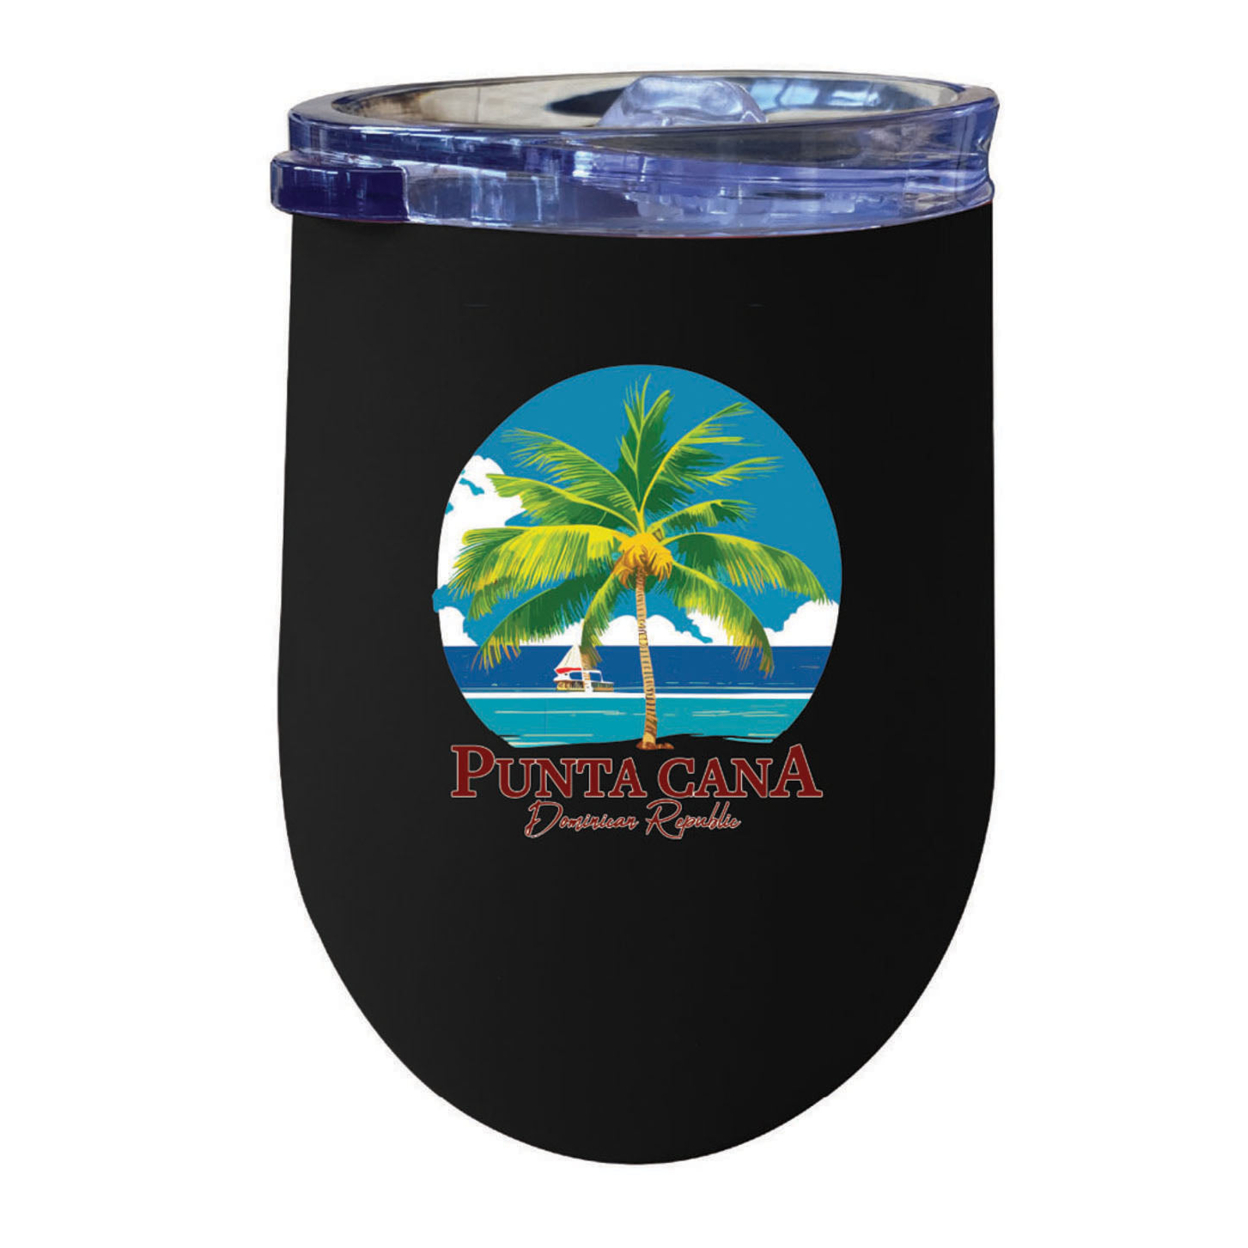 Punta Cana Dominican Republic Souvenir 12 Oz Insulated Wine Stainless Steel Tumbler - Coral, PARROT B